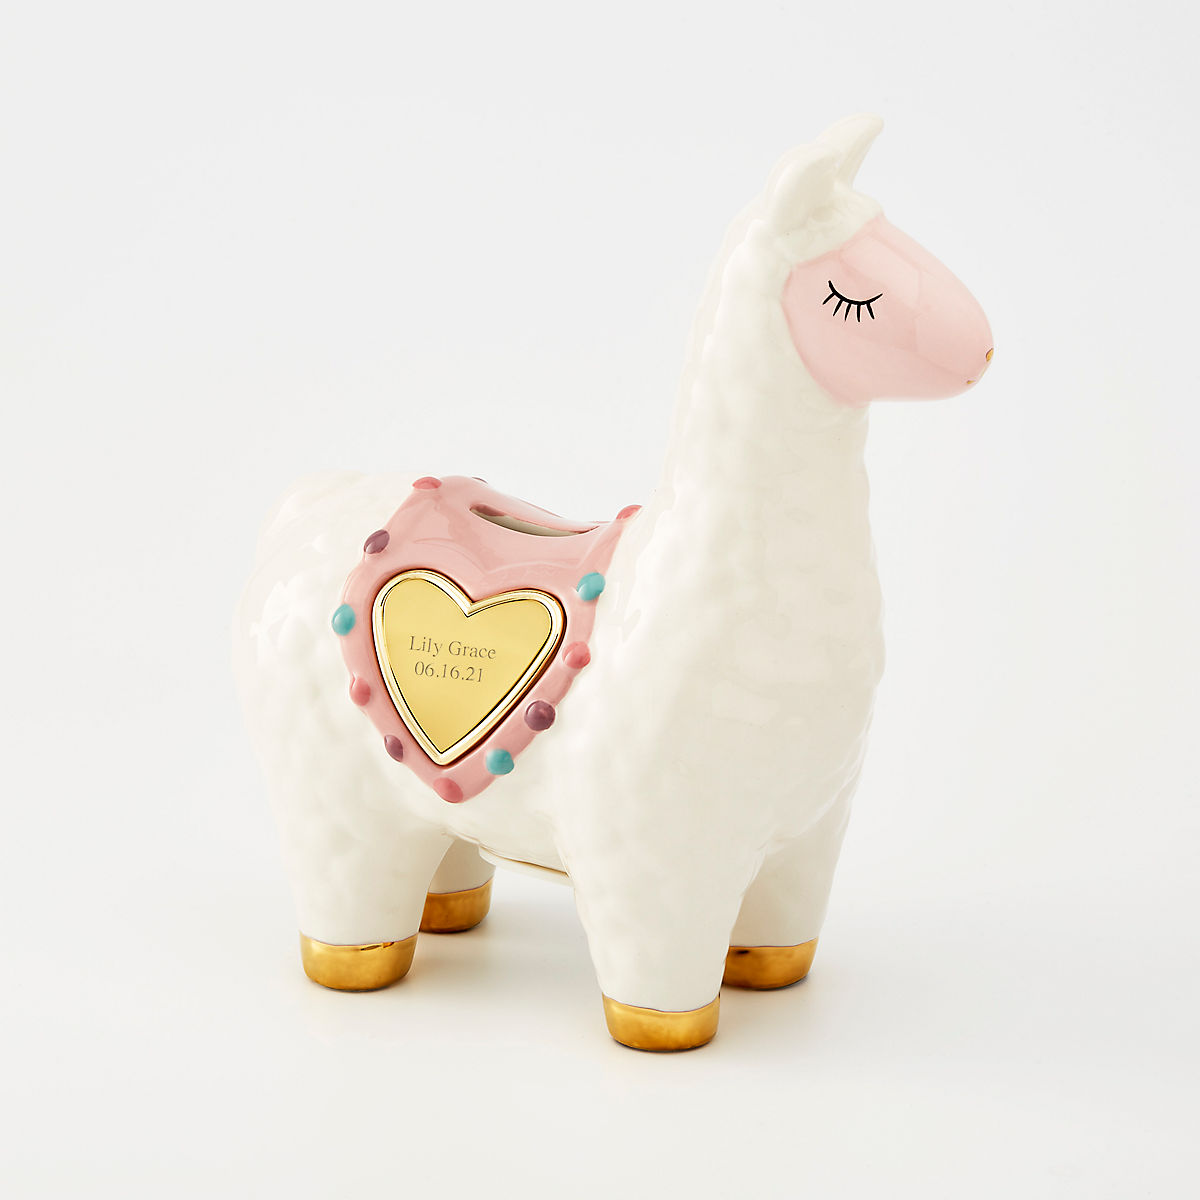 Details about   Llama Home Decoration Statue Cute and Lovely Ceramic Llama Coin Bank Piggy Bank 